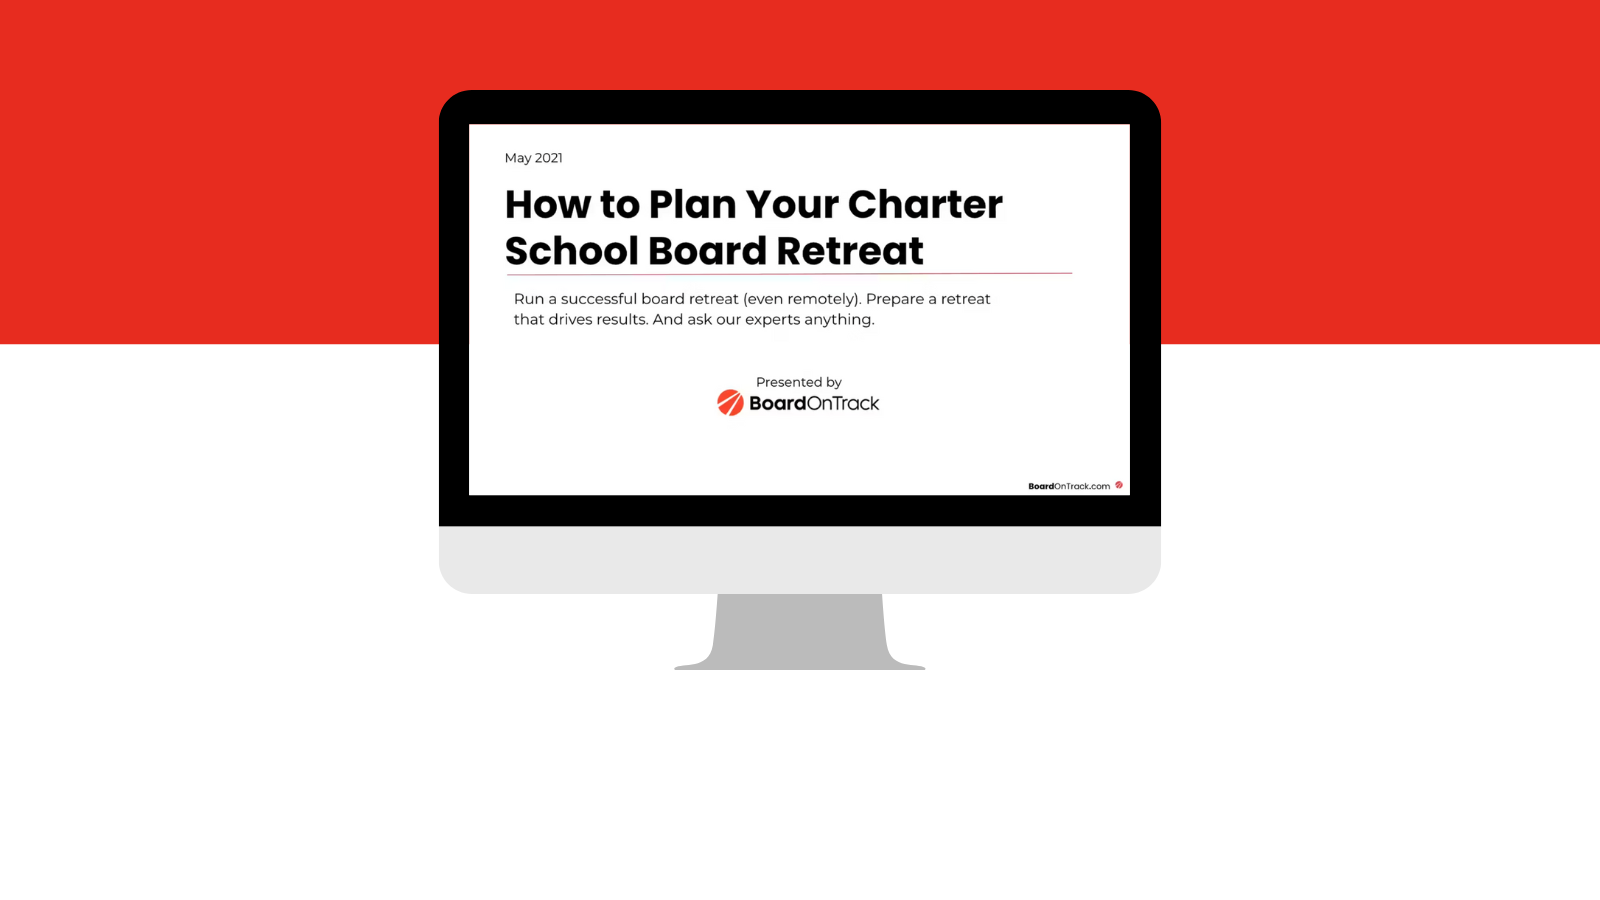 How to Plan Your Charter School Board Retreat